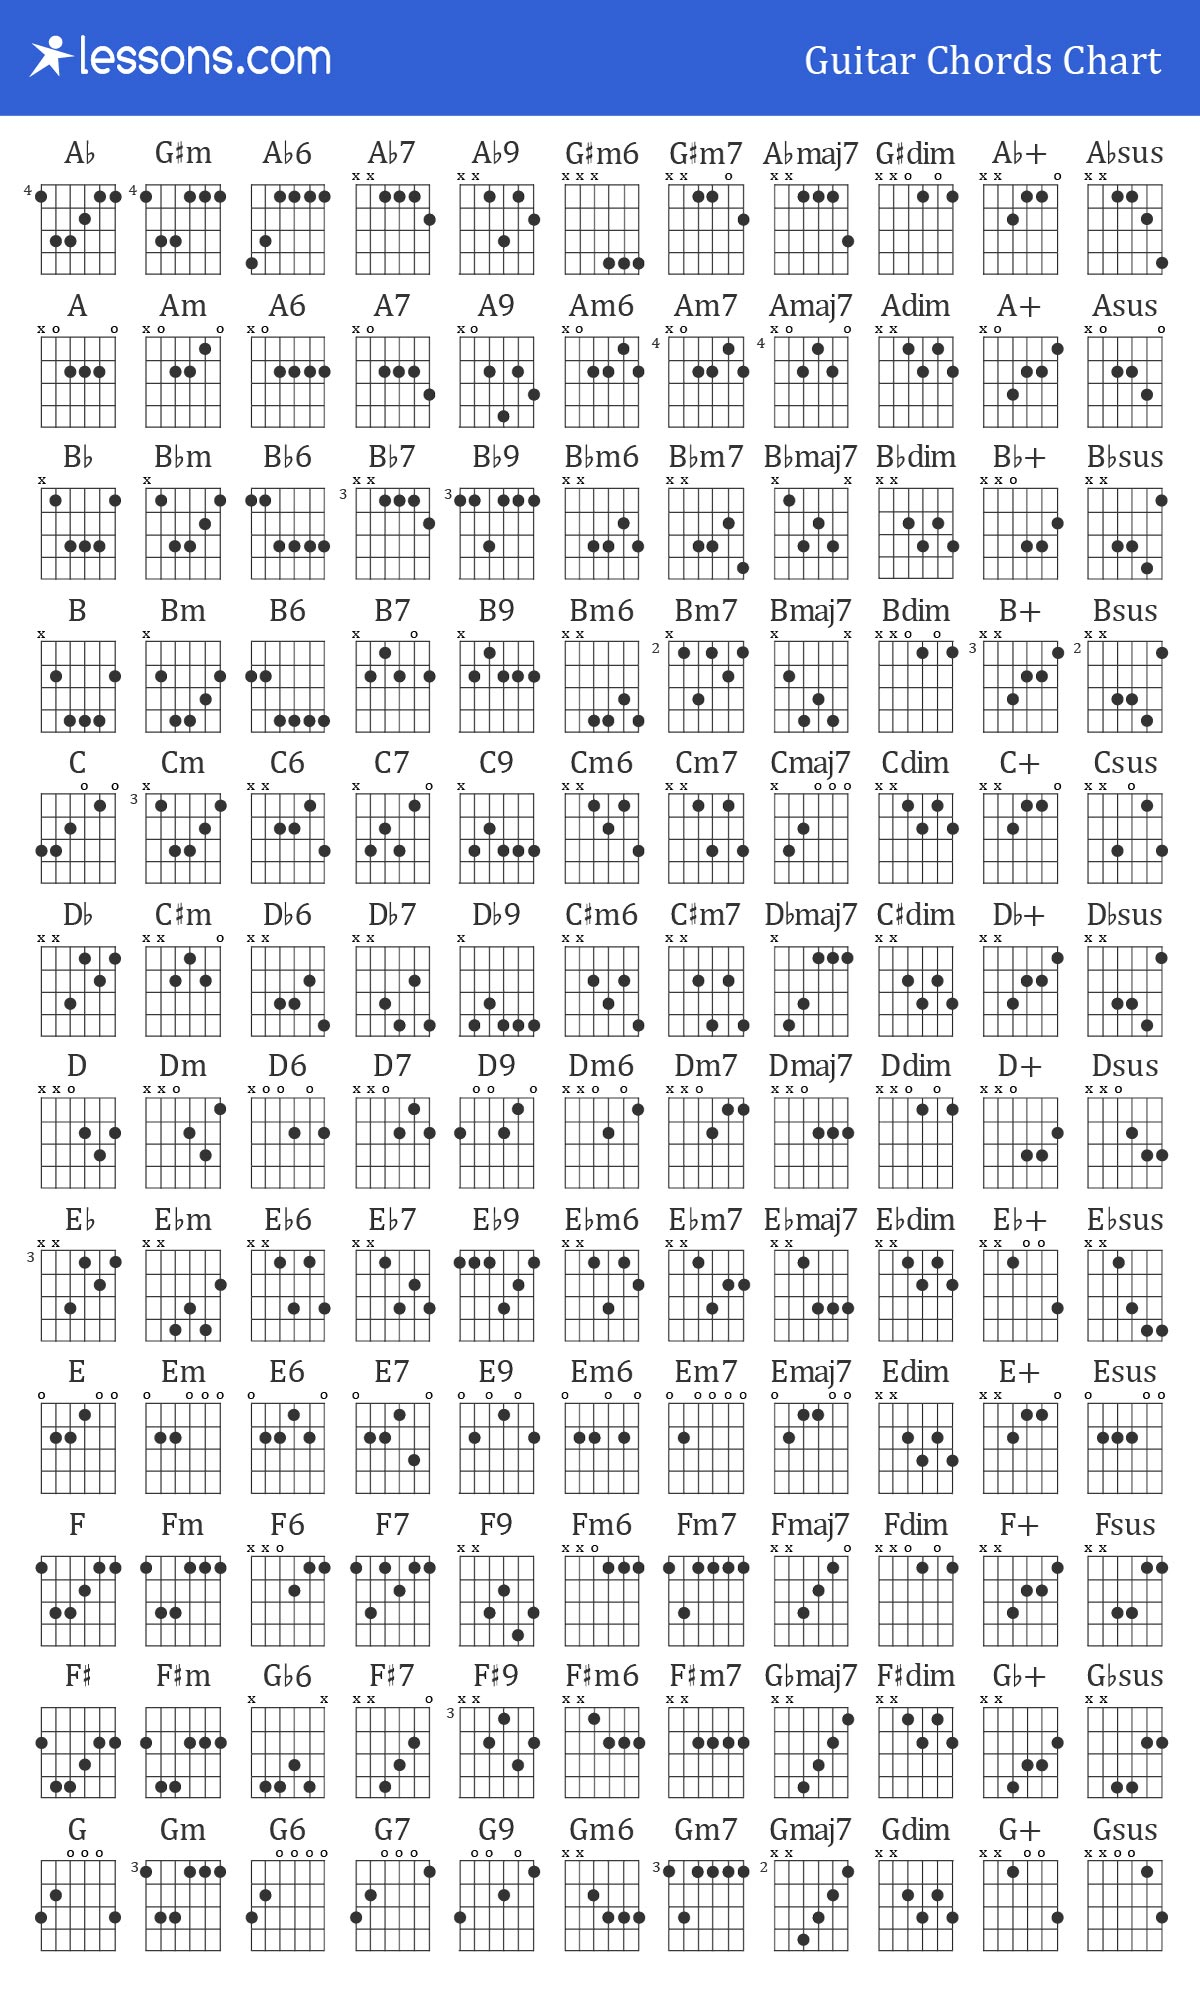 Guitar Chords Chart For Beginners